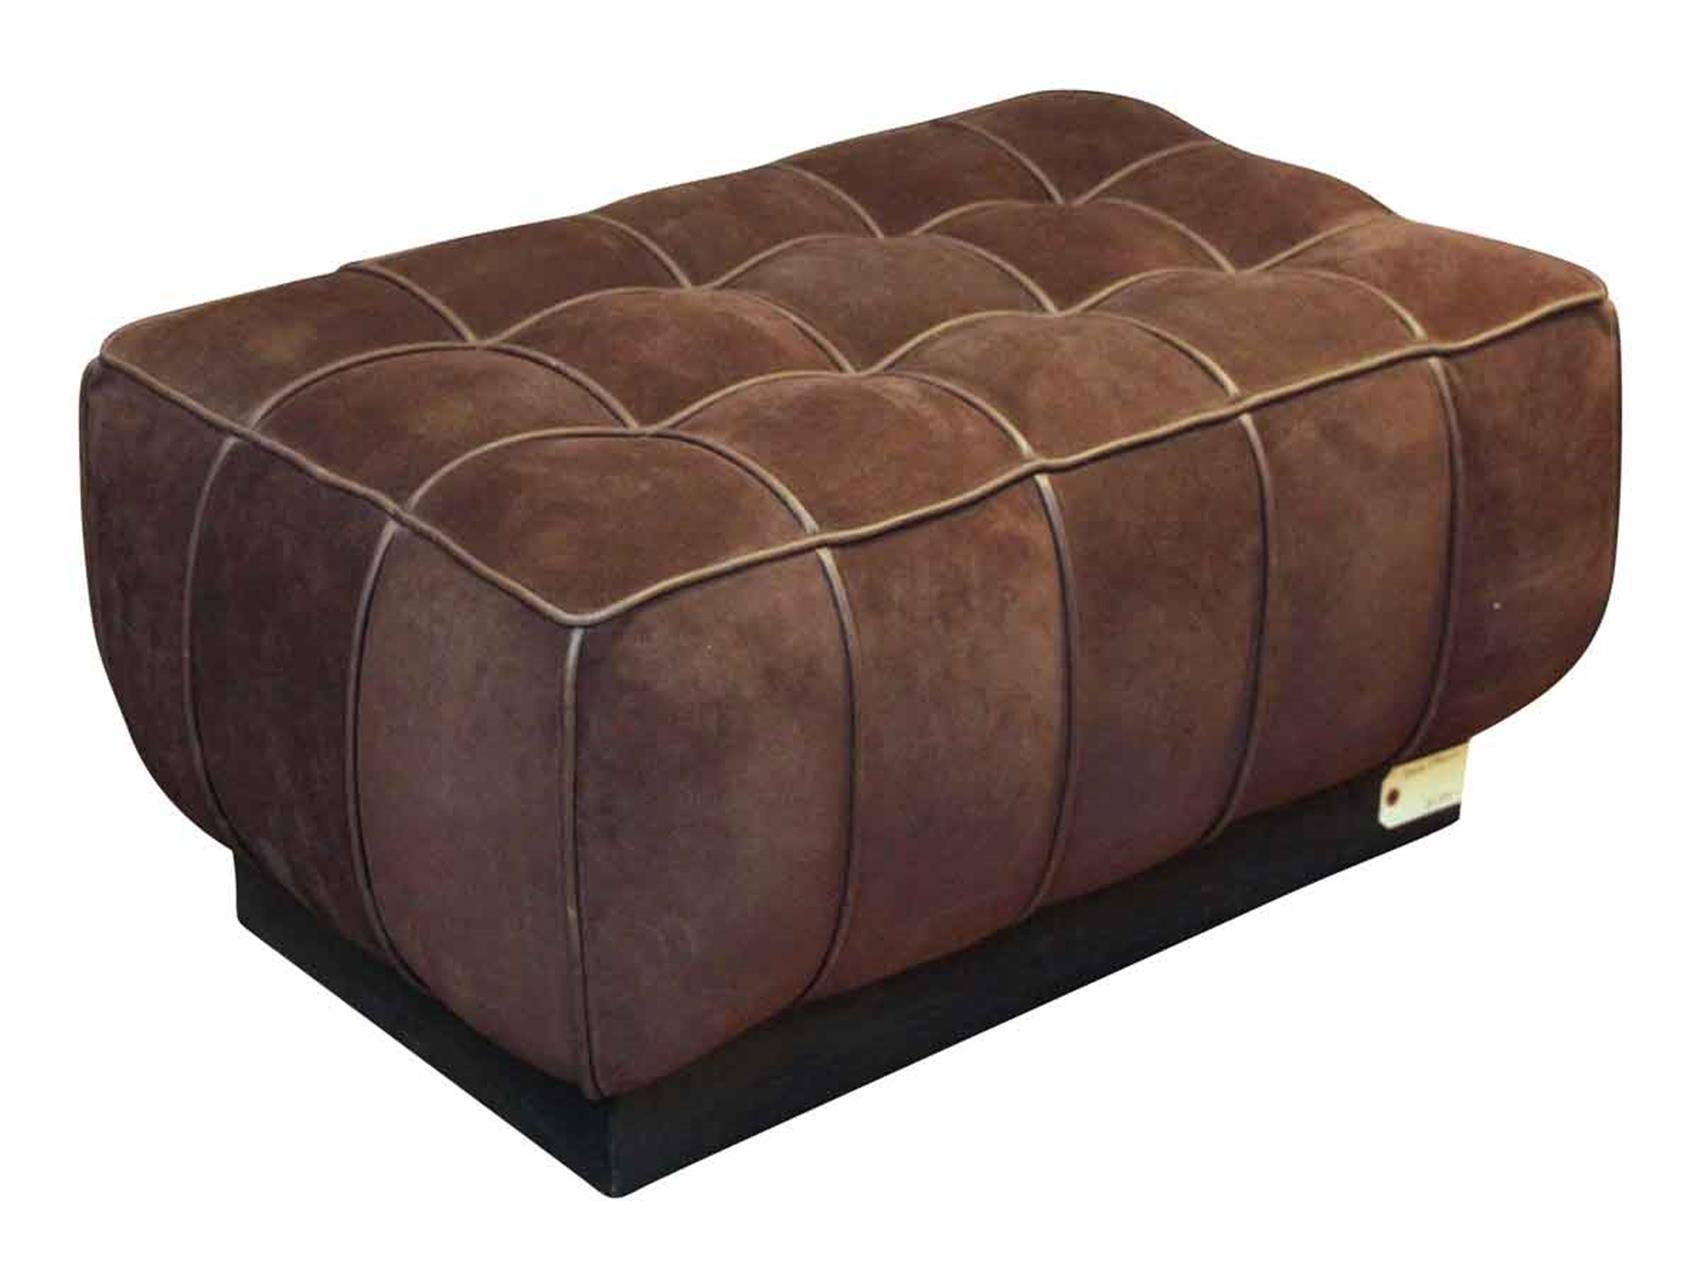 Warm brown suede ottoman with a wooden base and a leather handle feature on the backside. In excellent condition. From the 1990s. This can be seen at our 5 East 16th St, Union Square location in Manhattan.